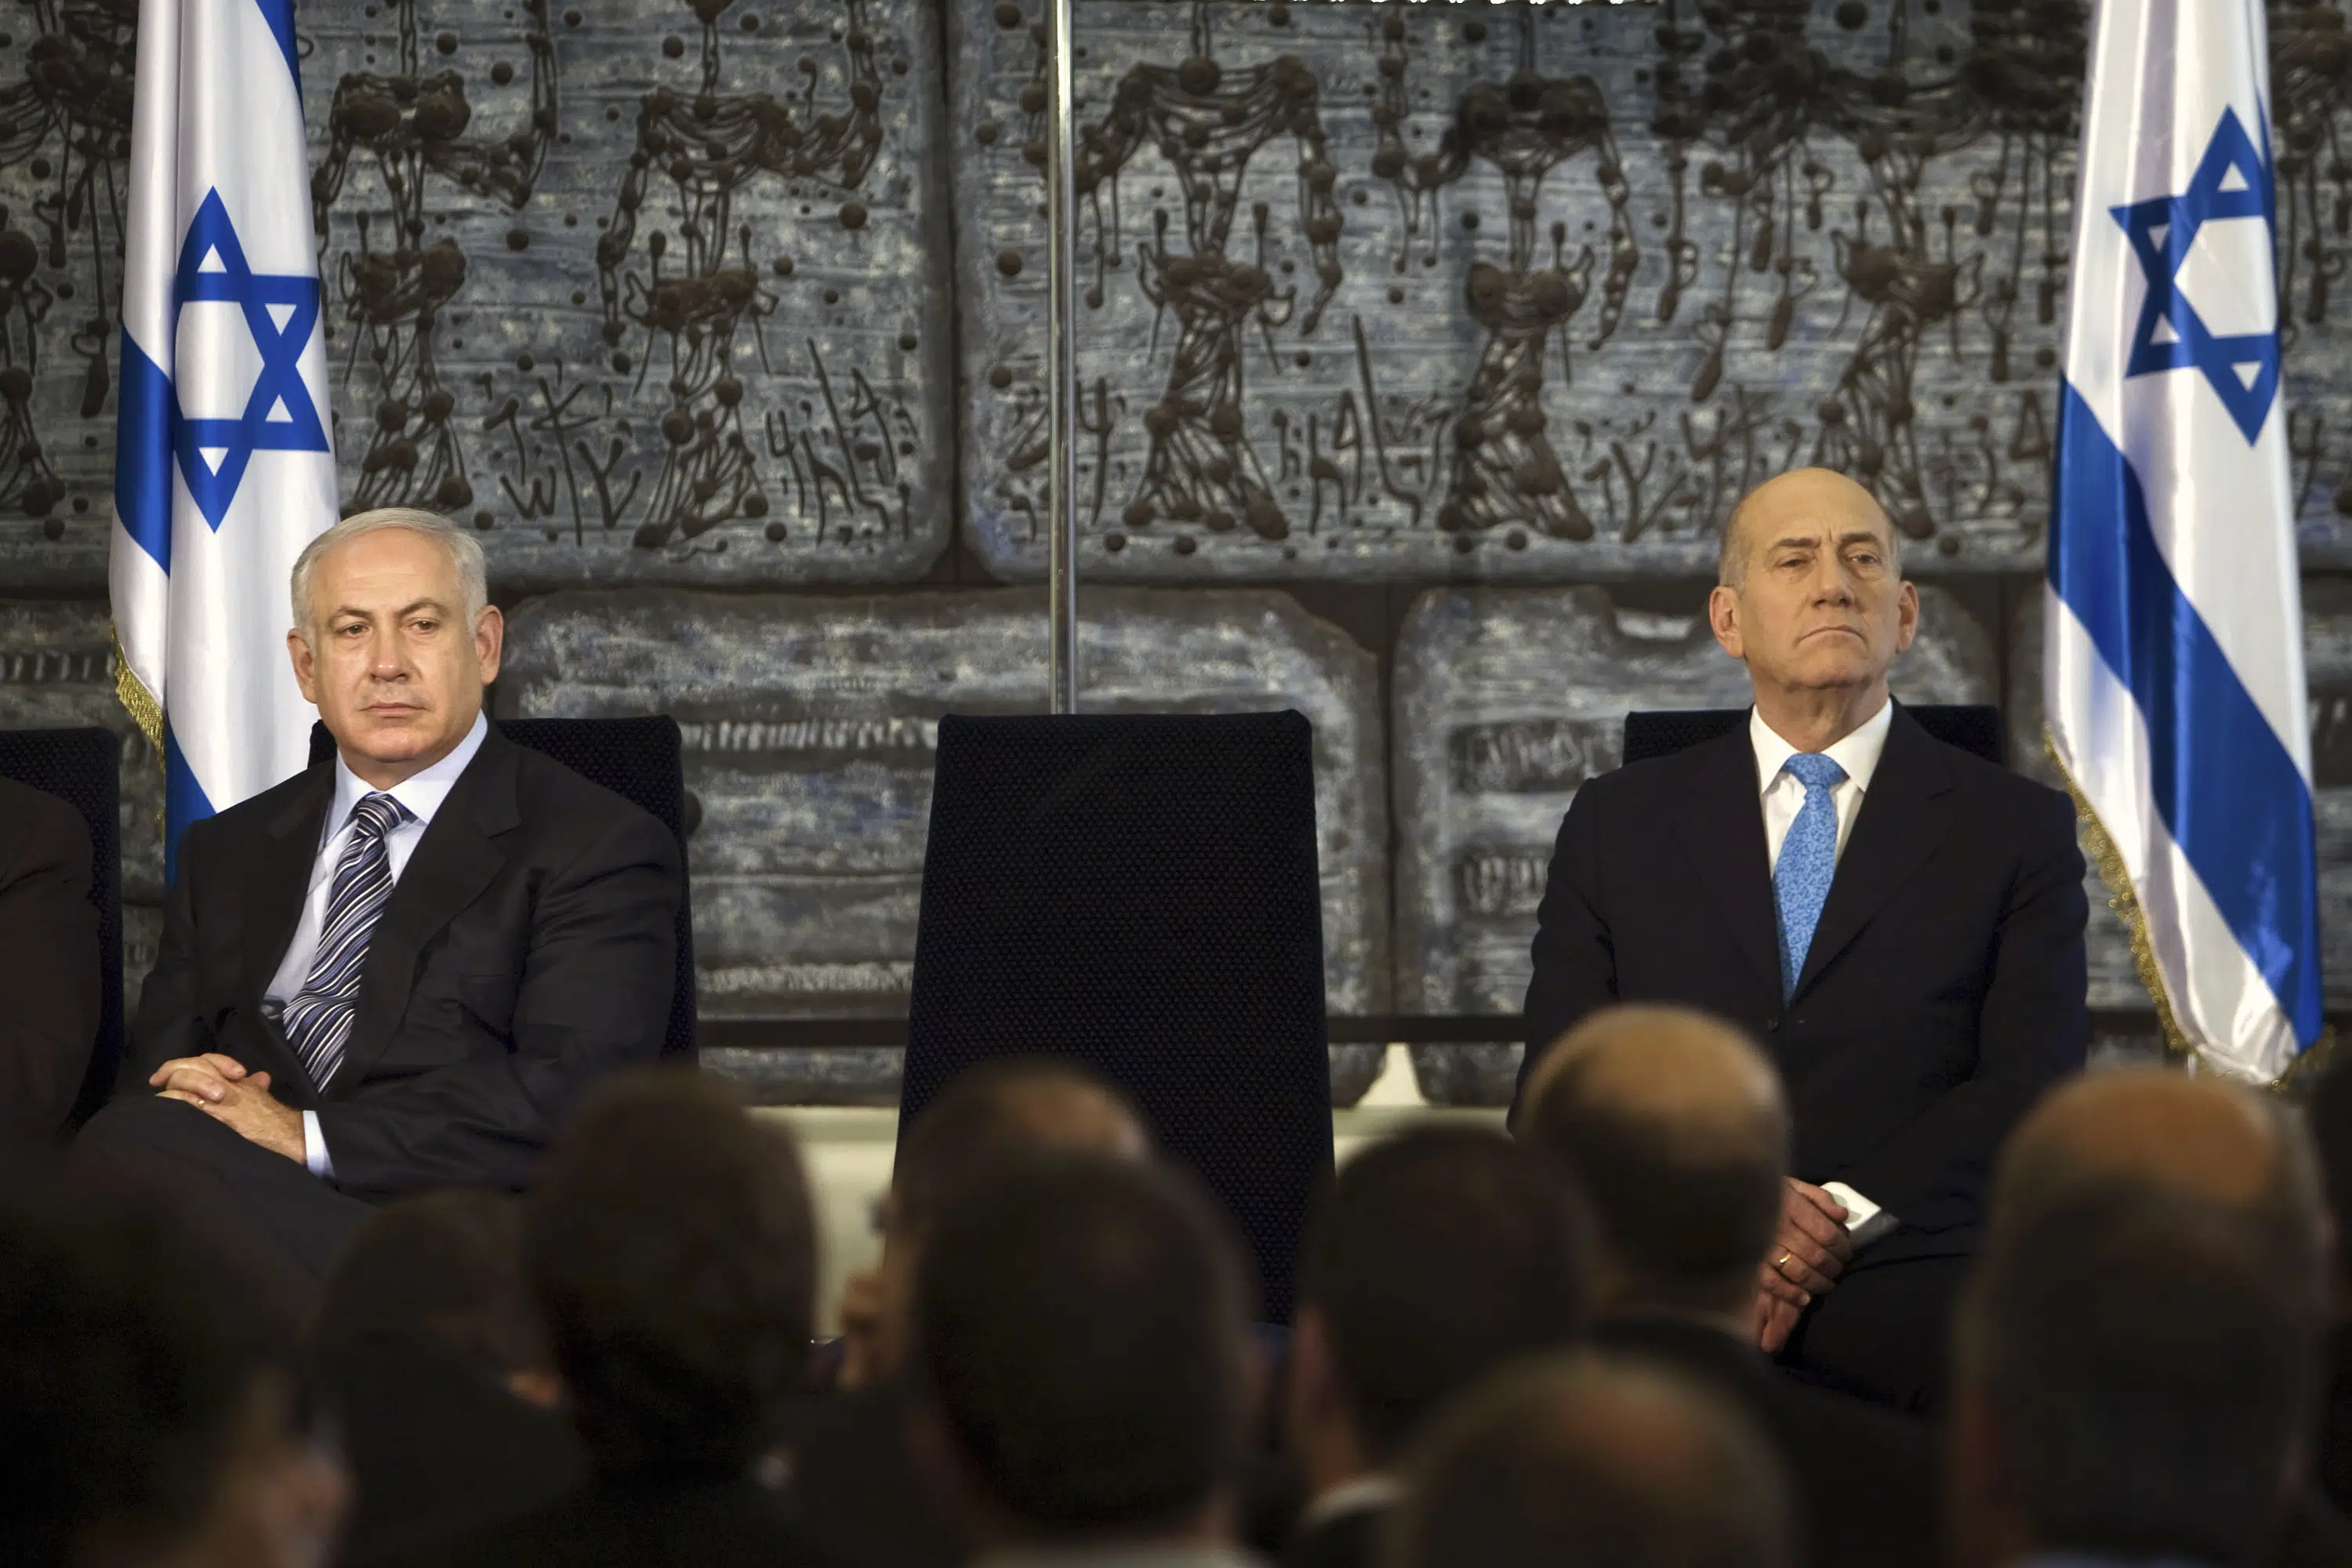 In rare move, former Israeli leader urges world to shun current one...